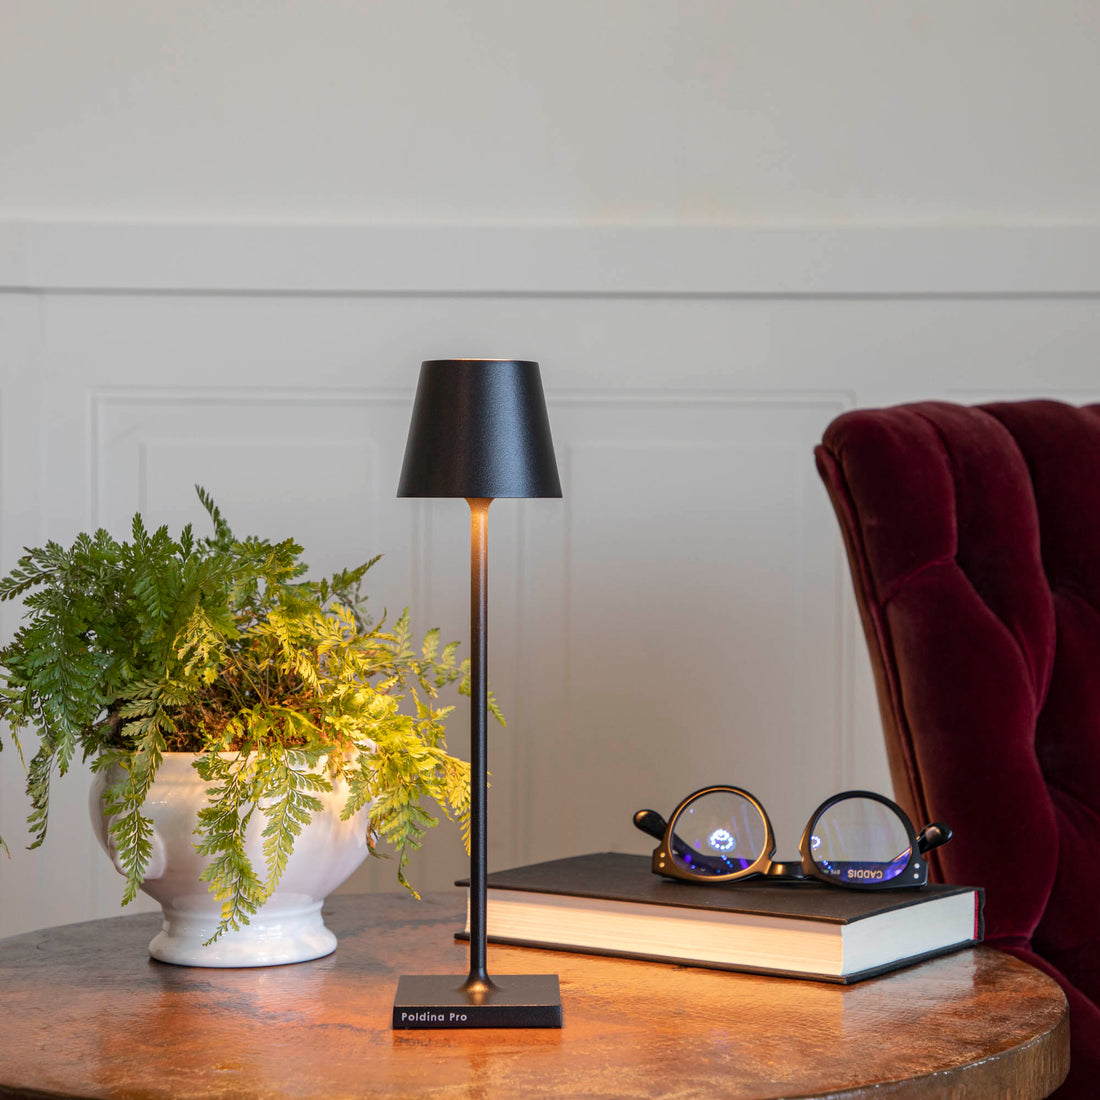 A Zafferano Black Micro Cordless Lamp on a table next to a book and a plant.